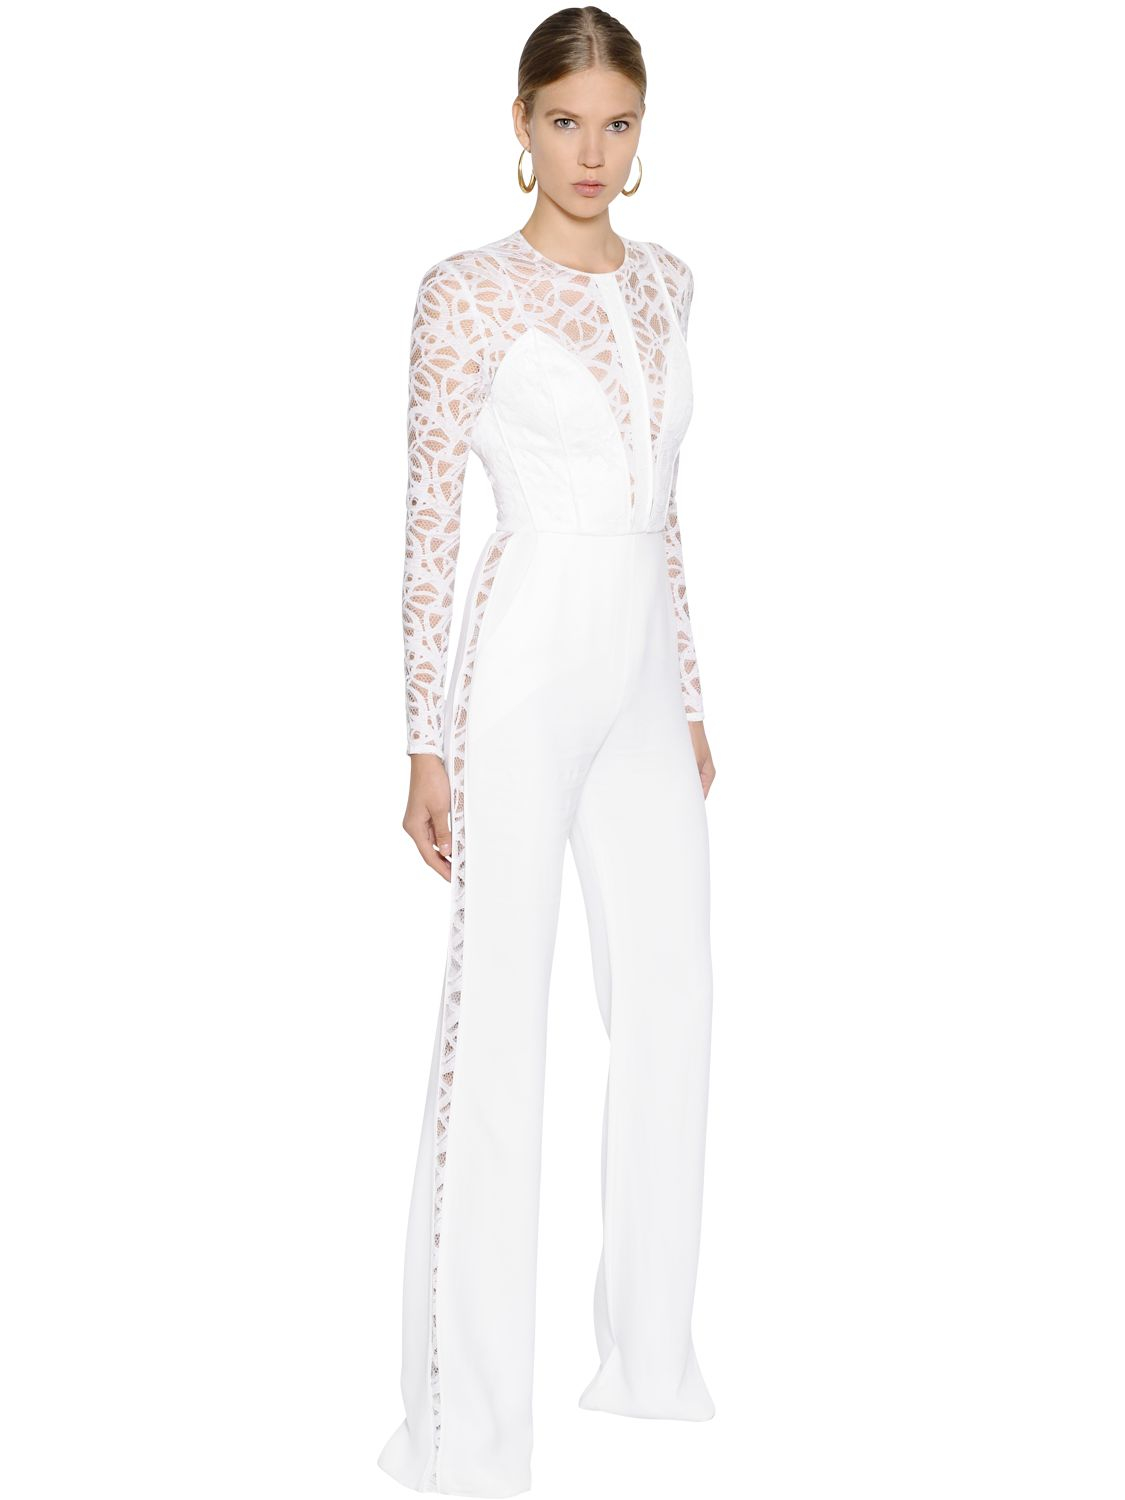 Lyst - Elie Saab Cady & Lace Jumpsuit in White